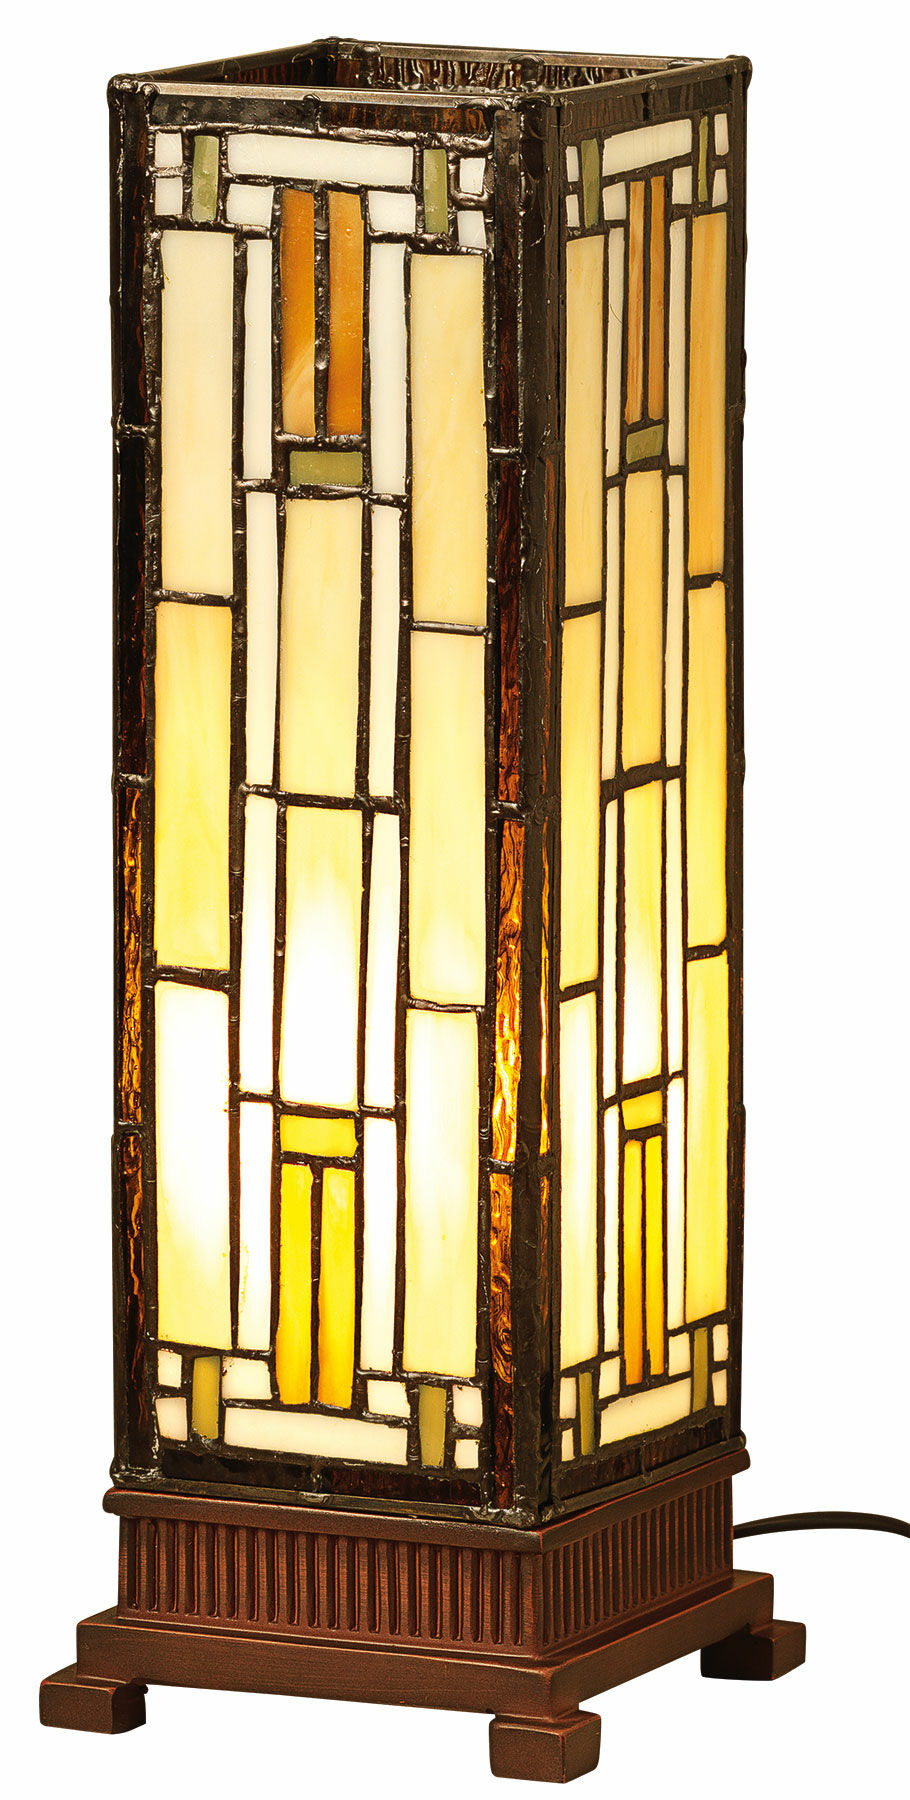 Table lamp "Empire", small version - after Louis C. Tiffany